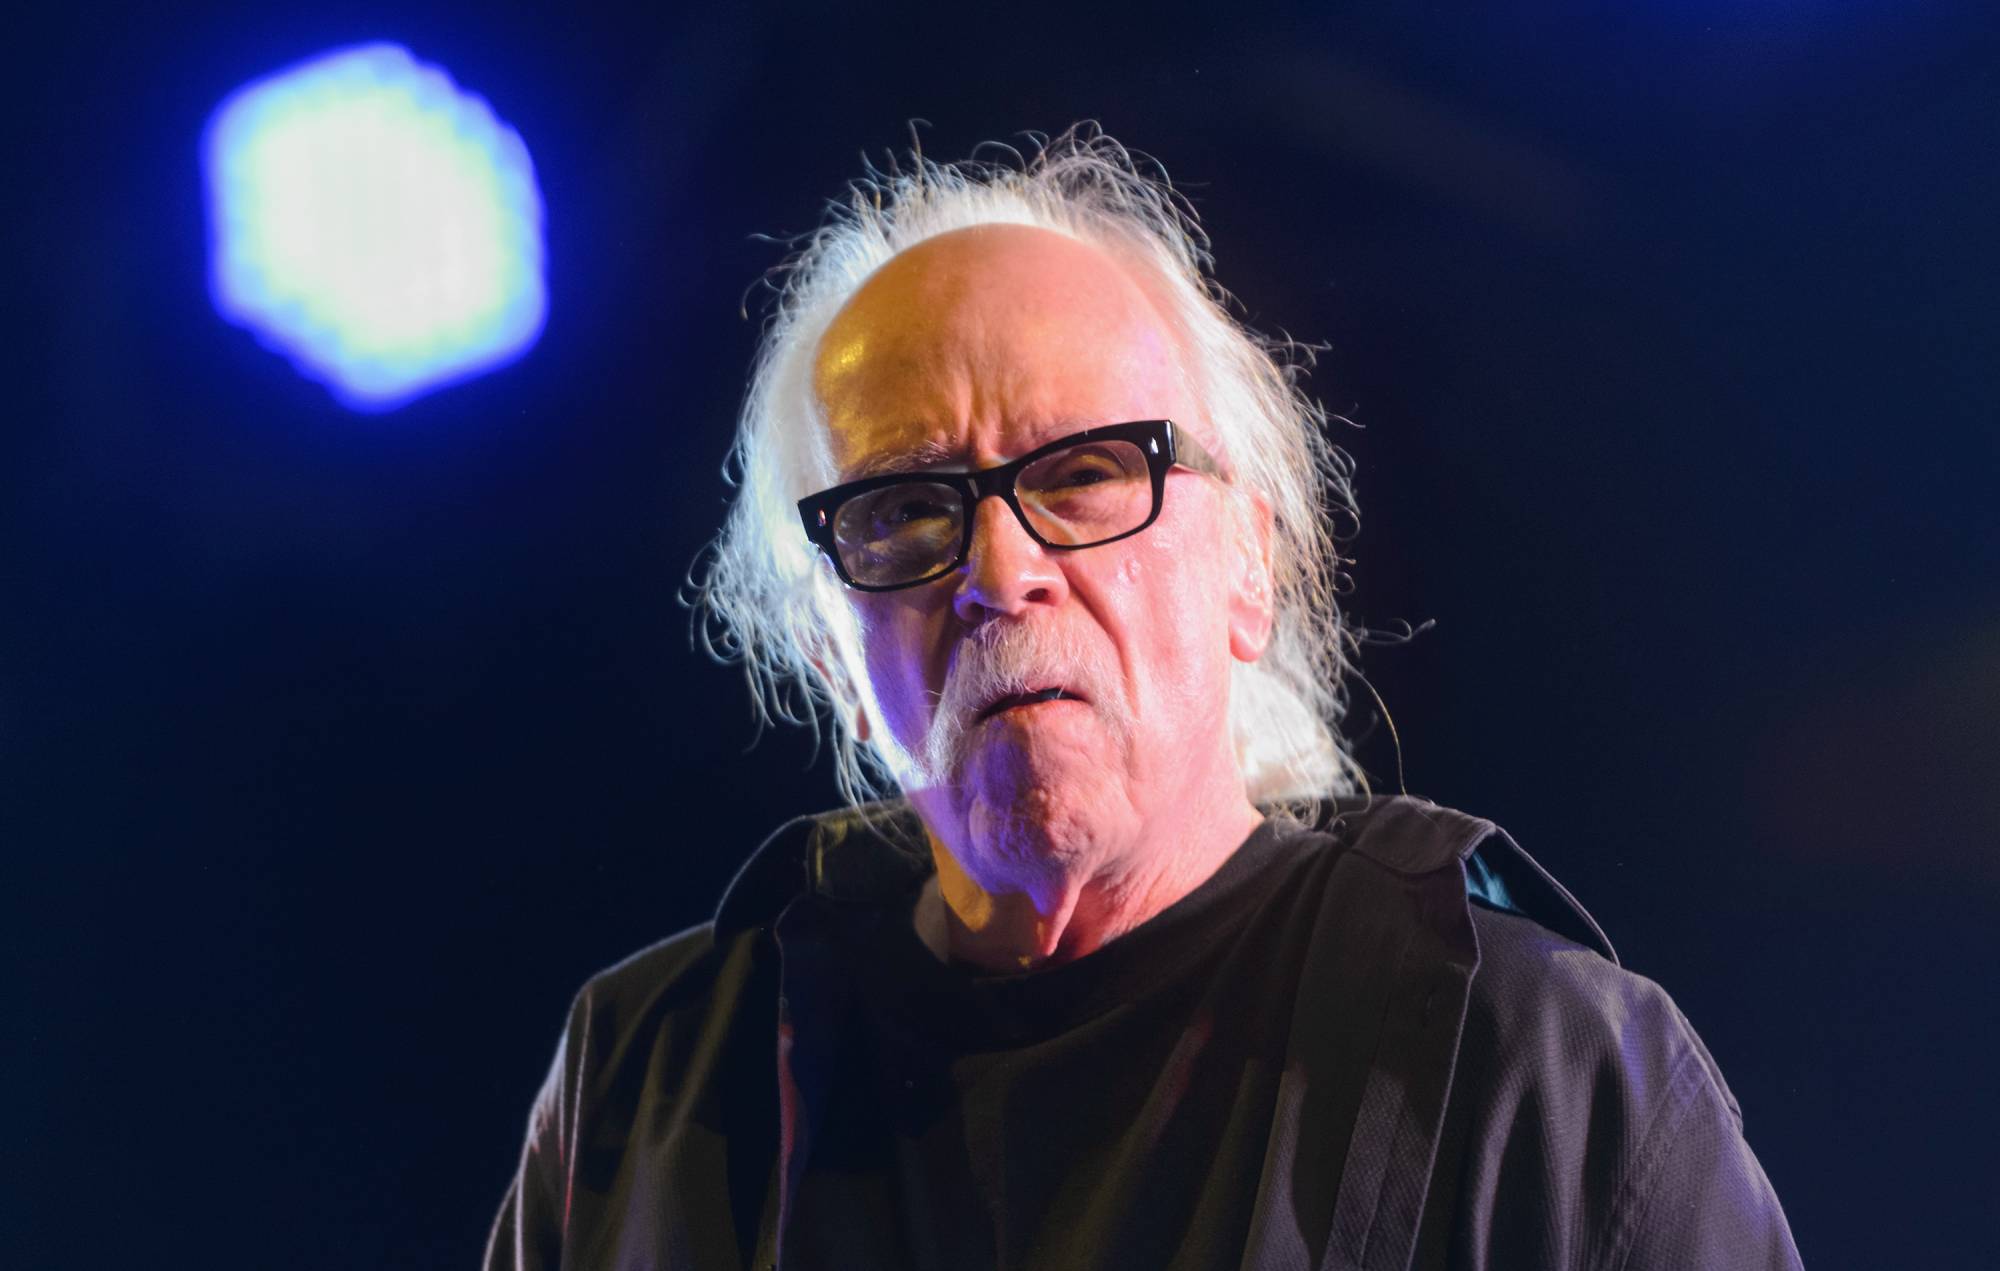 John Carpenter says he “can’t believe” he watched ‘Barbie’: “It went right over my head”